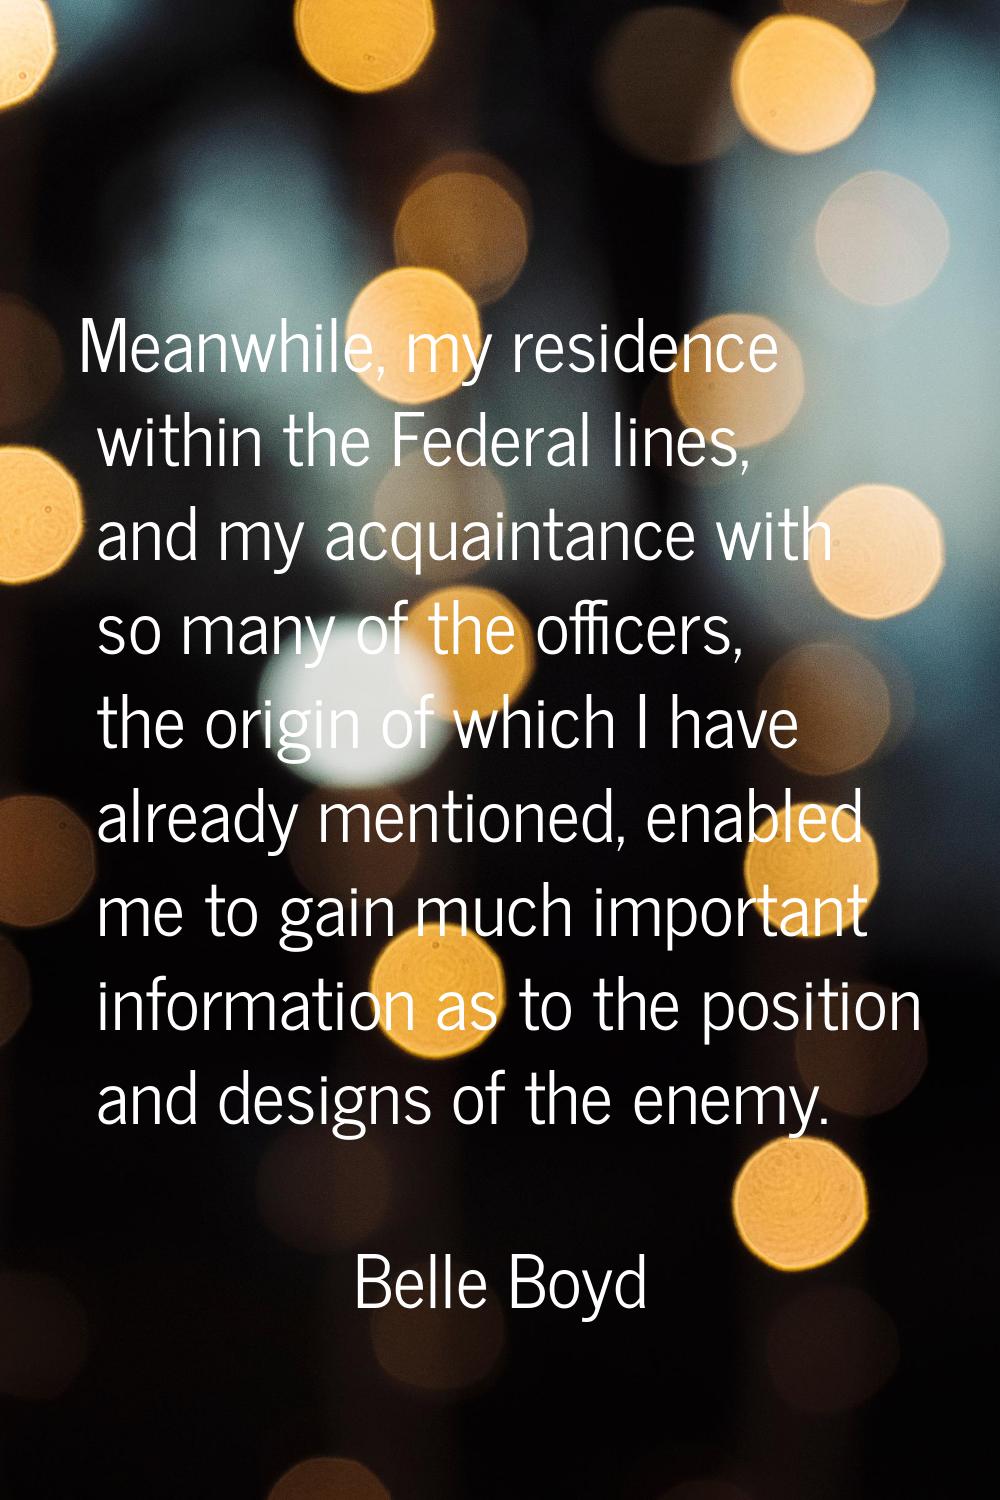 Meanwhile, my residence within the Federal lines, and my acquaintance with so many of the officers,